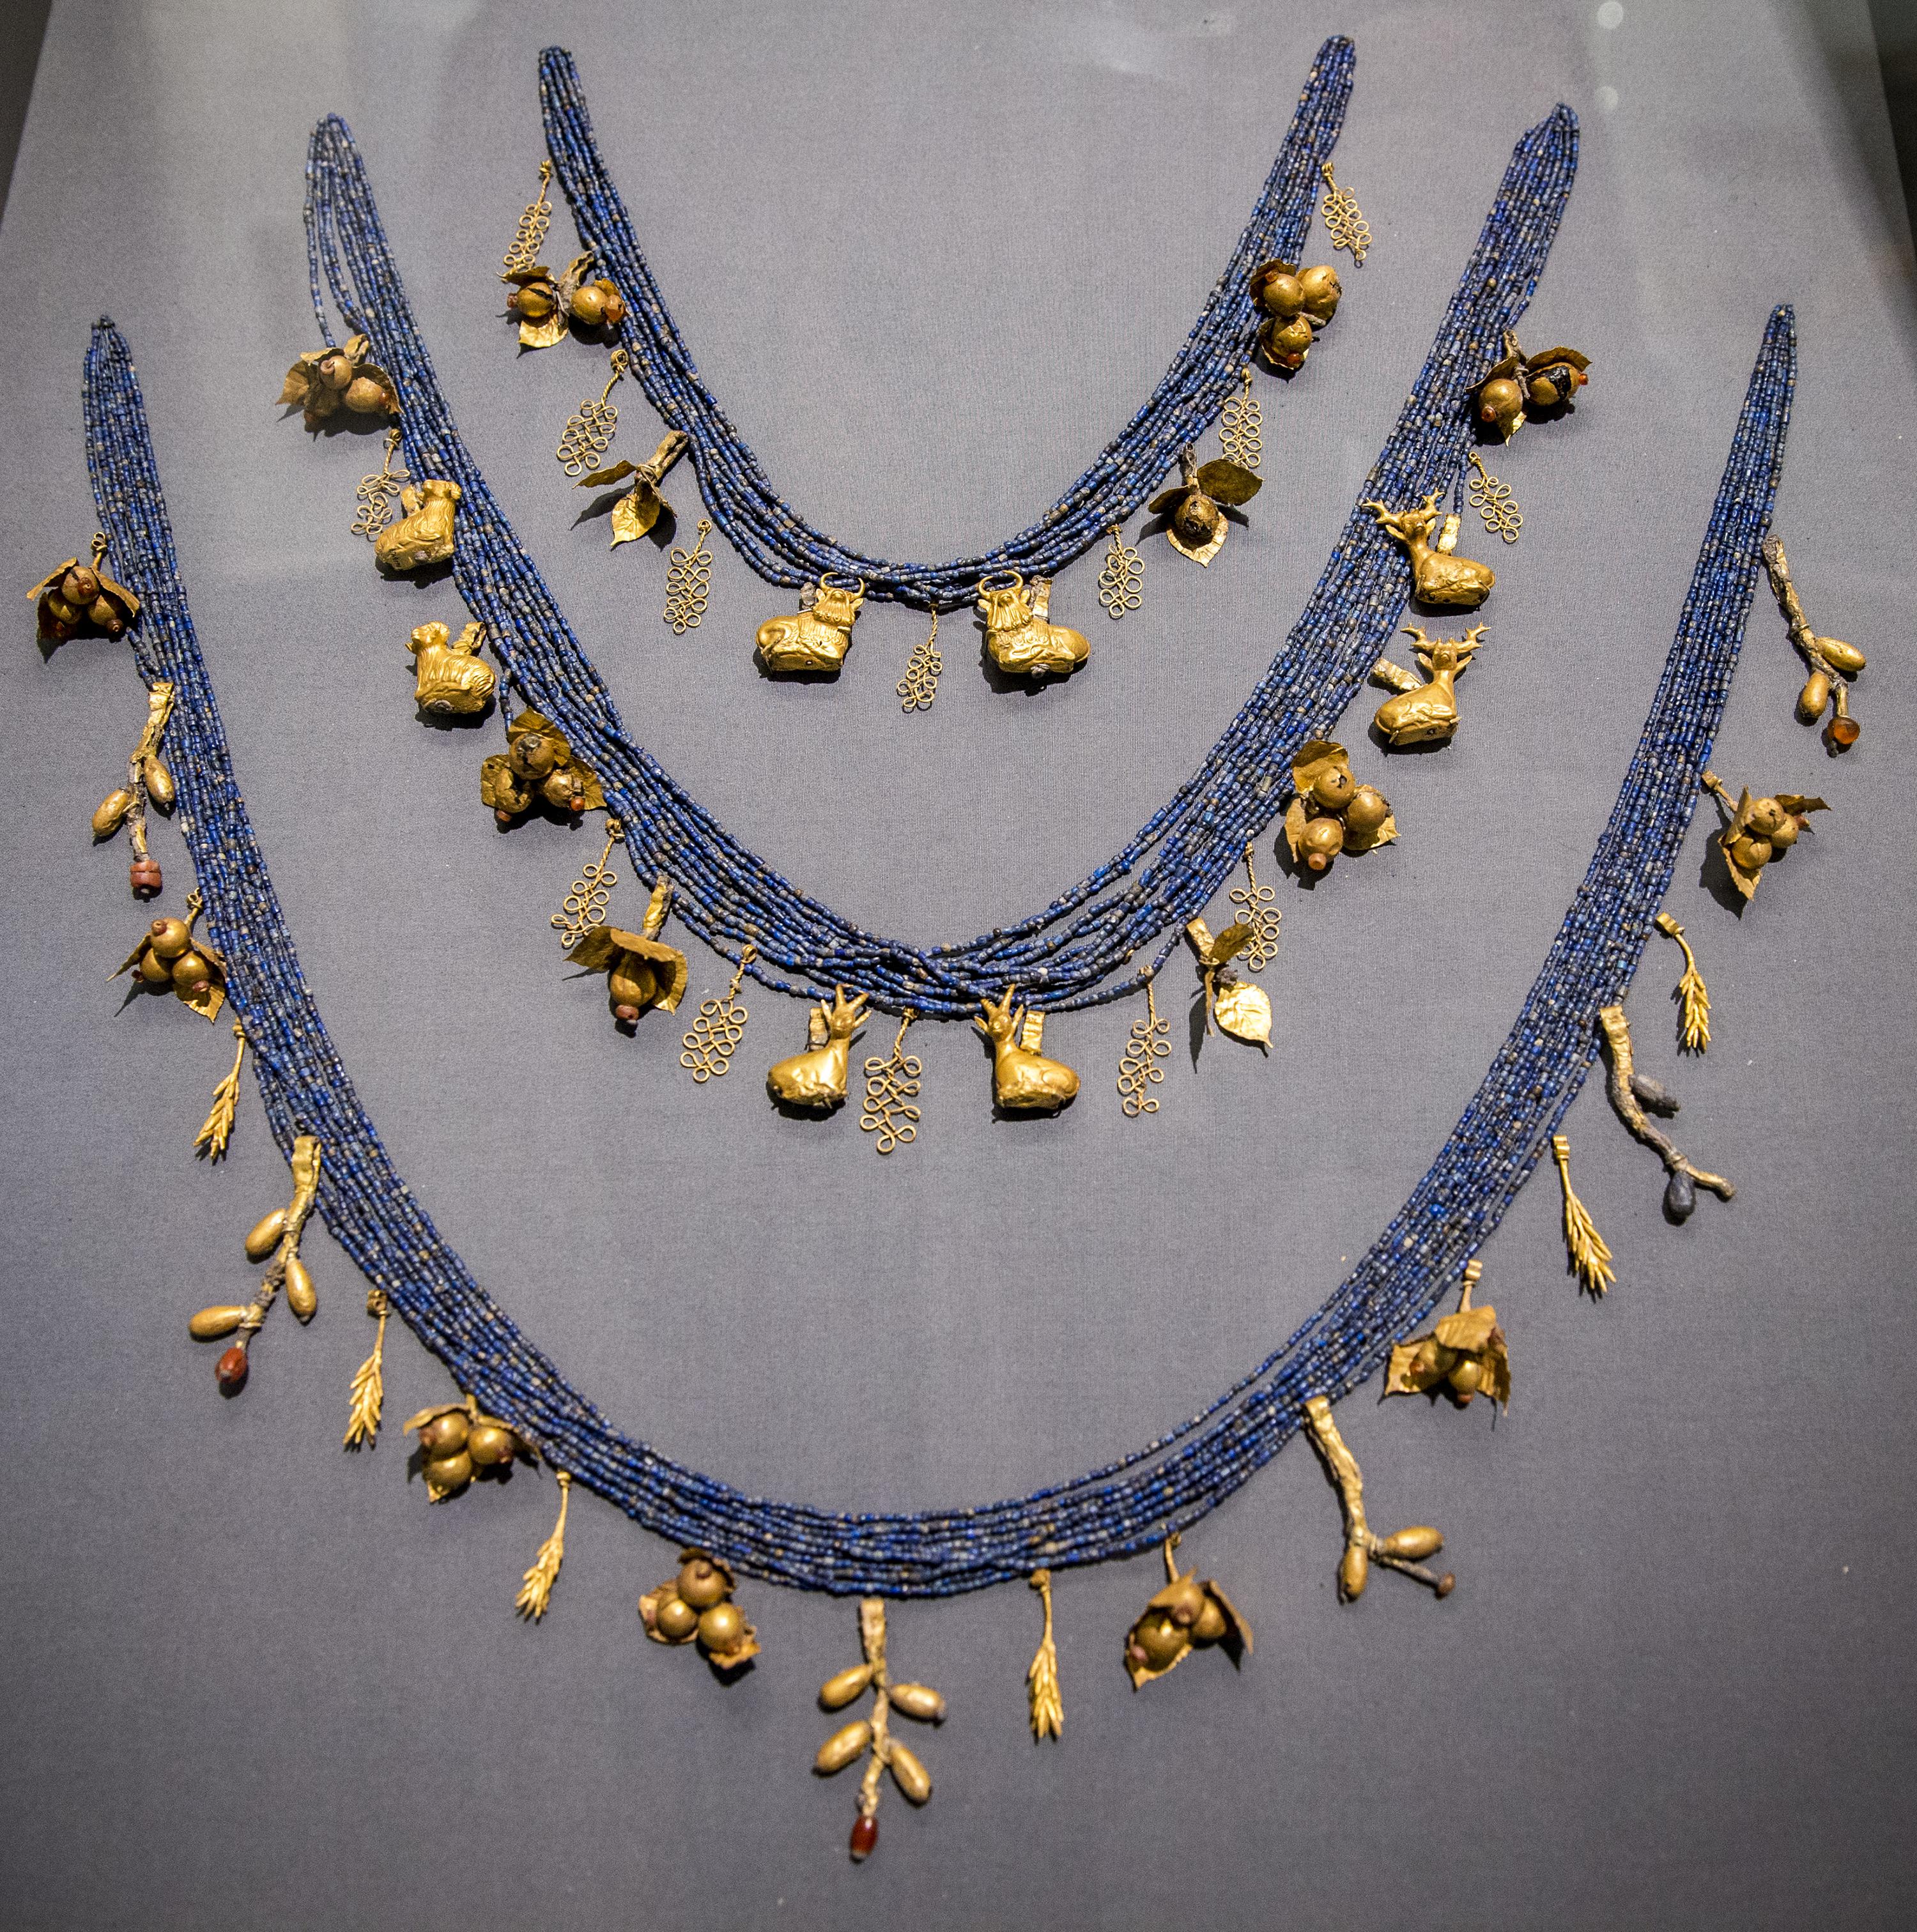 Diadems of Queen Puabi, made of gold and tiny lapis lazuli beads. From Iraq, c. 2600 BCE, now on display at the University of Pennsylvania Museum of Archaeology and Anthropology.jpg